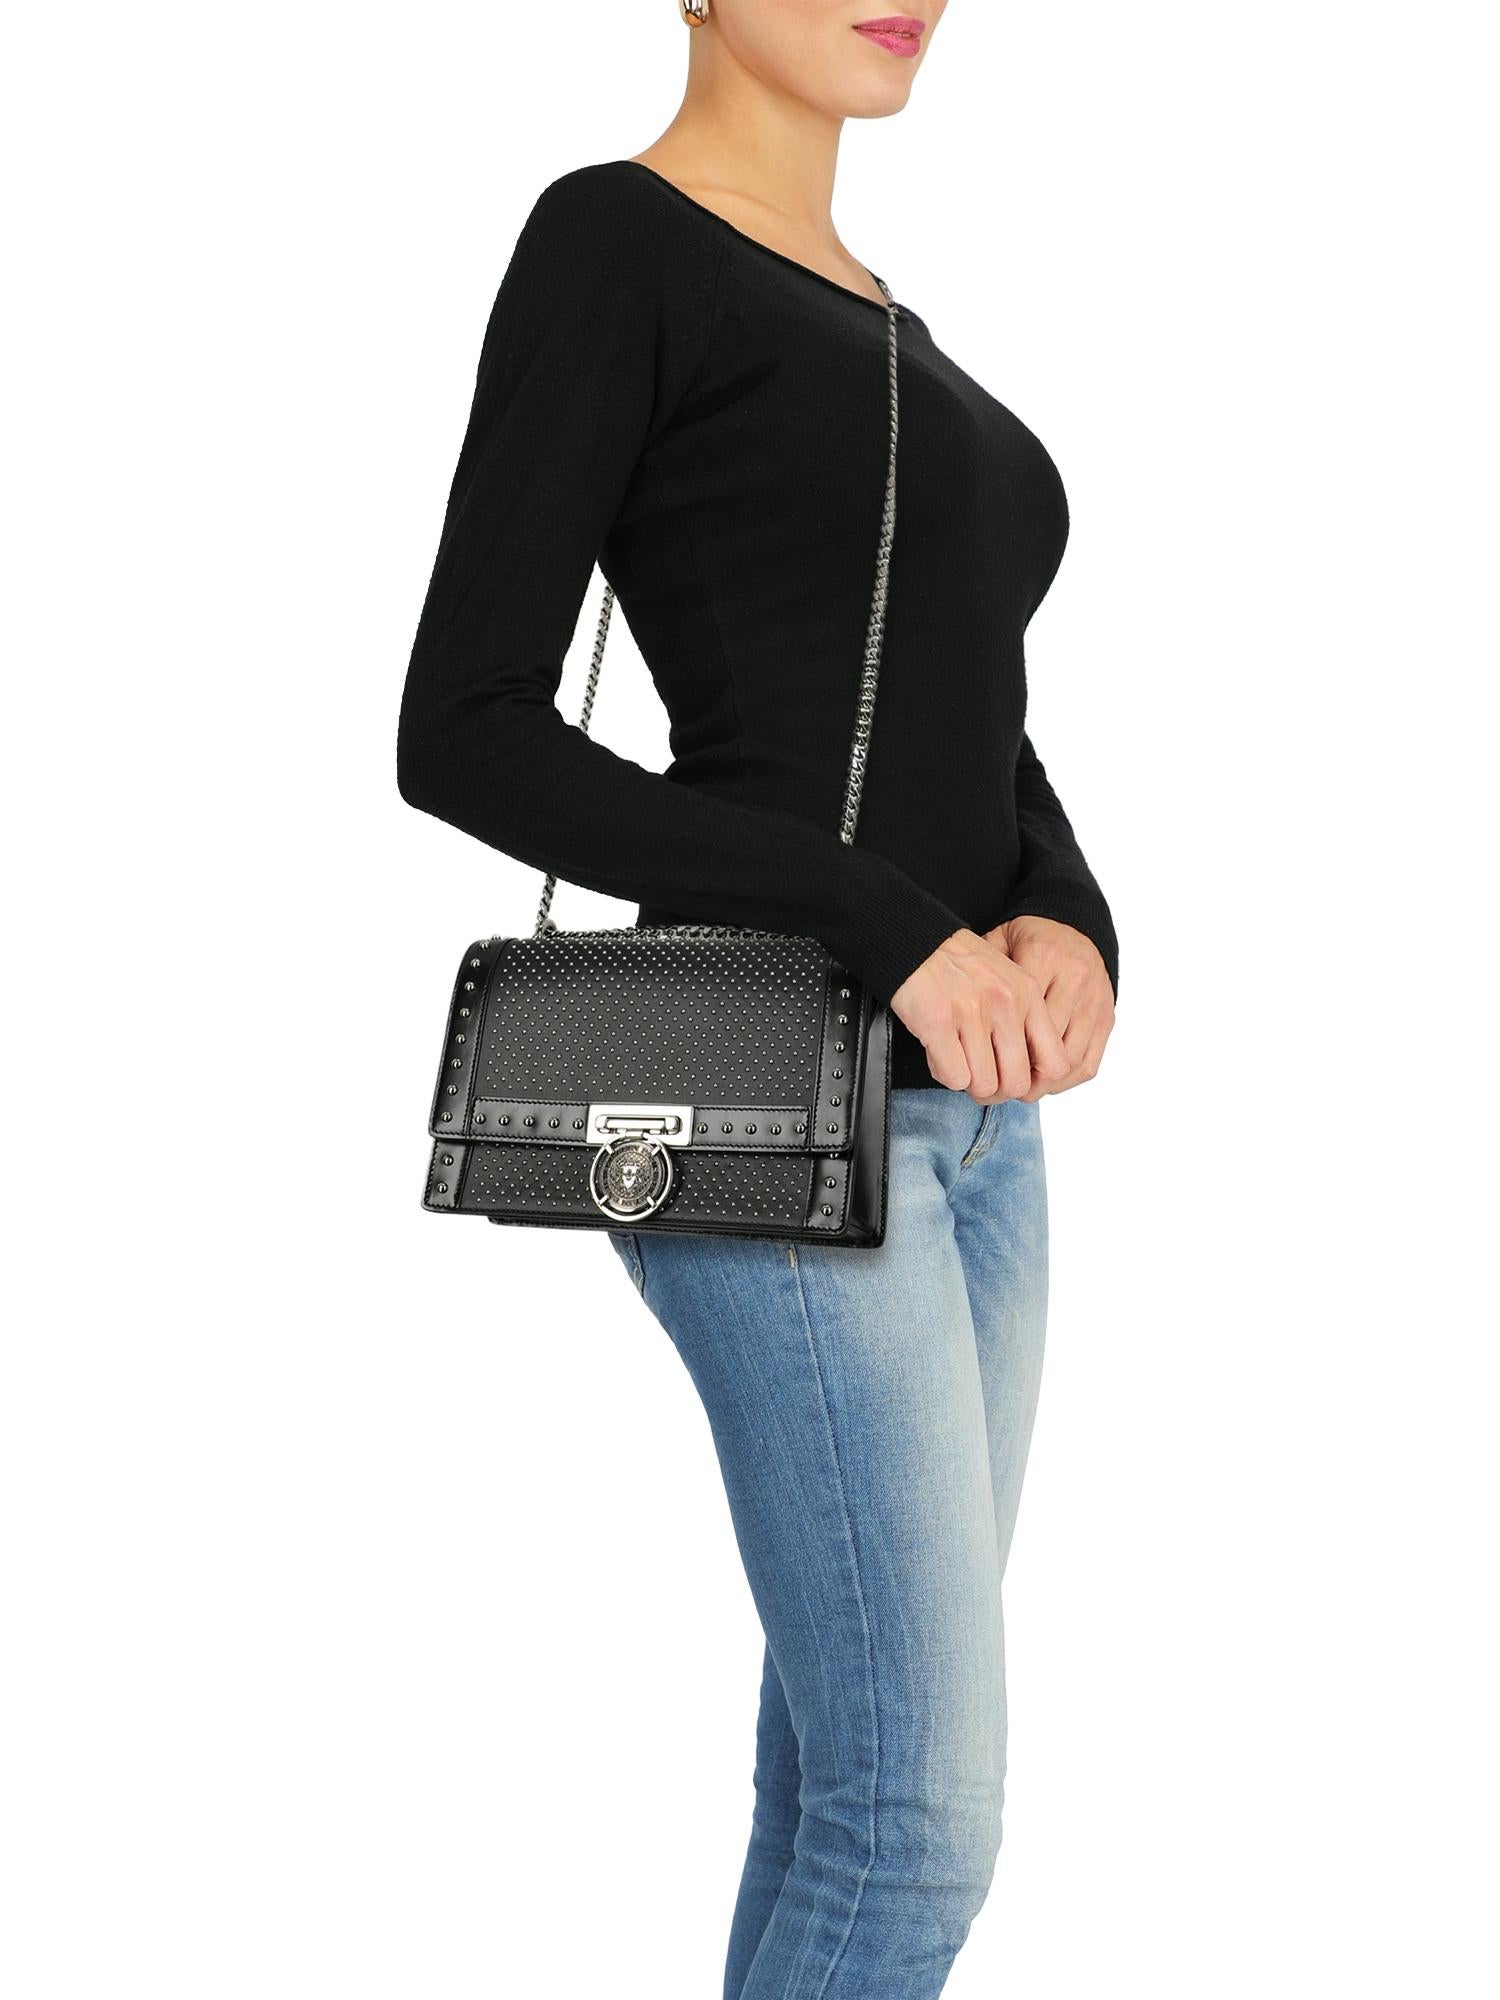 Bag, leather, solid color, front logo, turn-lock closure, silver-tone hardware, internal pocket, rockstud embellishment, evening

Includes: N/A

Product Condition: Very Good
Lining: visible signs. External Leather: visible